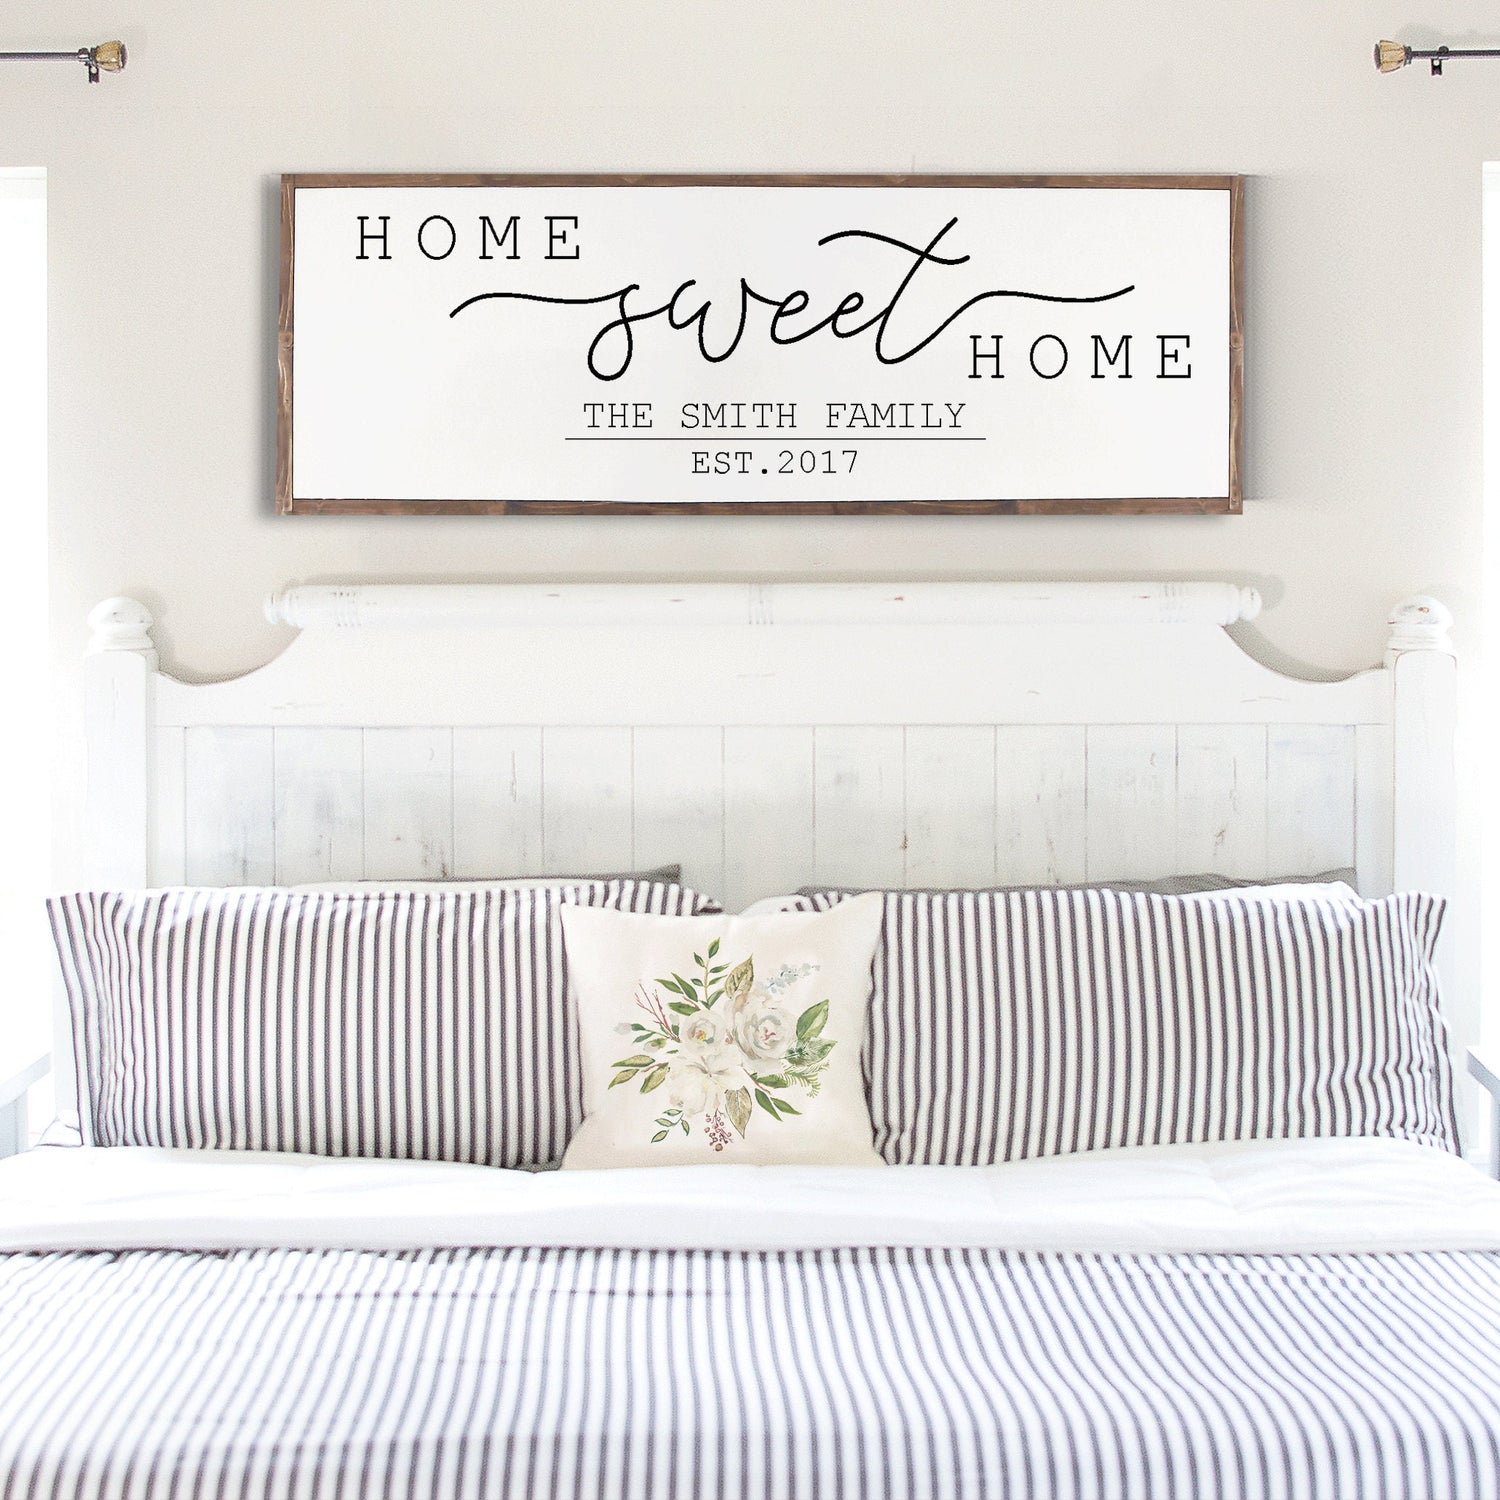 Home Sweet Home Personalized, Hand Painted, Rustic Wood Sign, Home Sweet Home Personalized Rustic Wood Sign